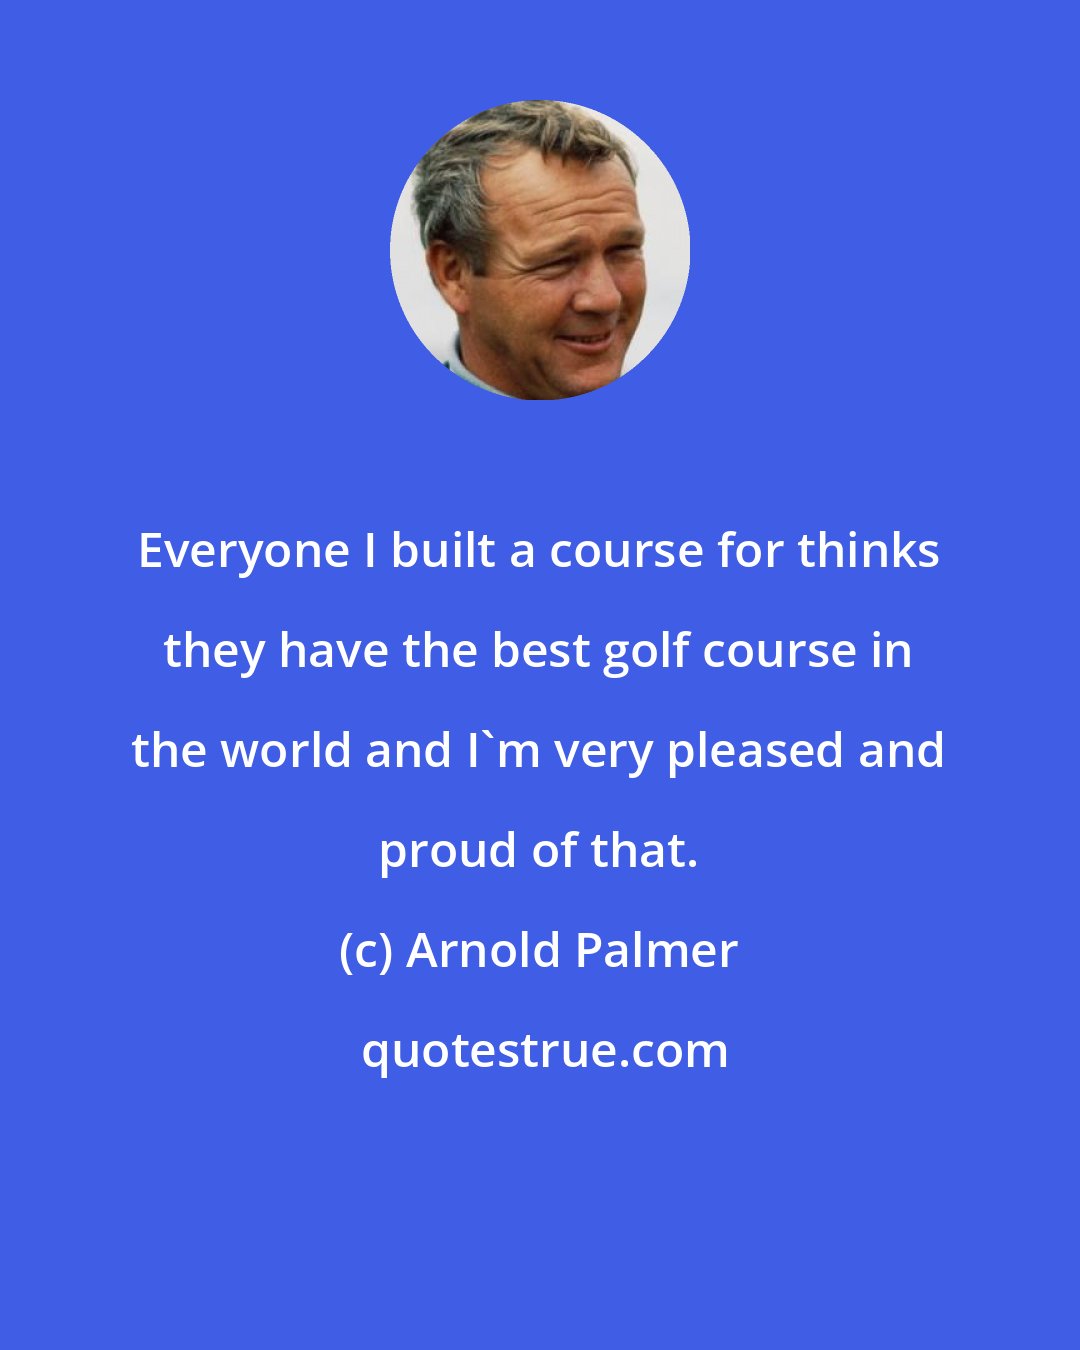 Arnold Palmer: Everyone I built a course for thinks they have the best golf course in the world and I'm very pleased and proud of that.